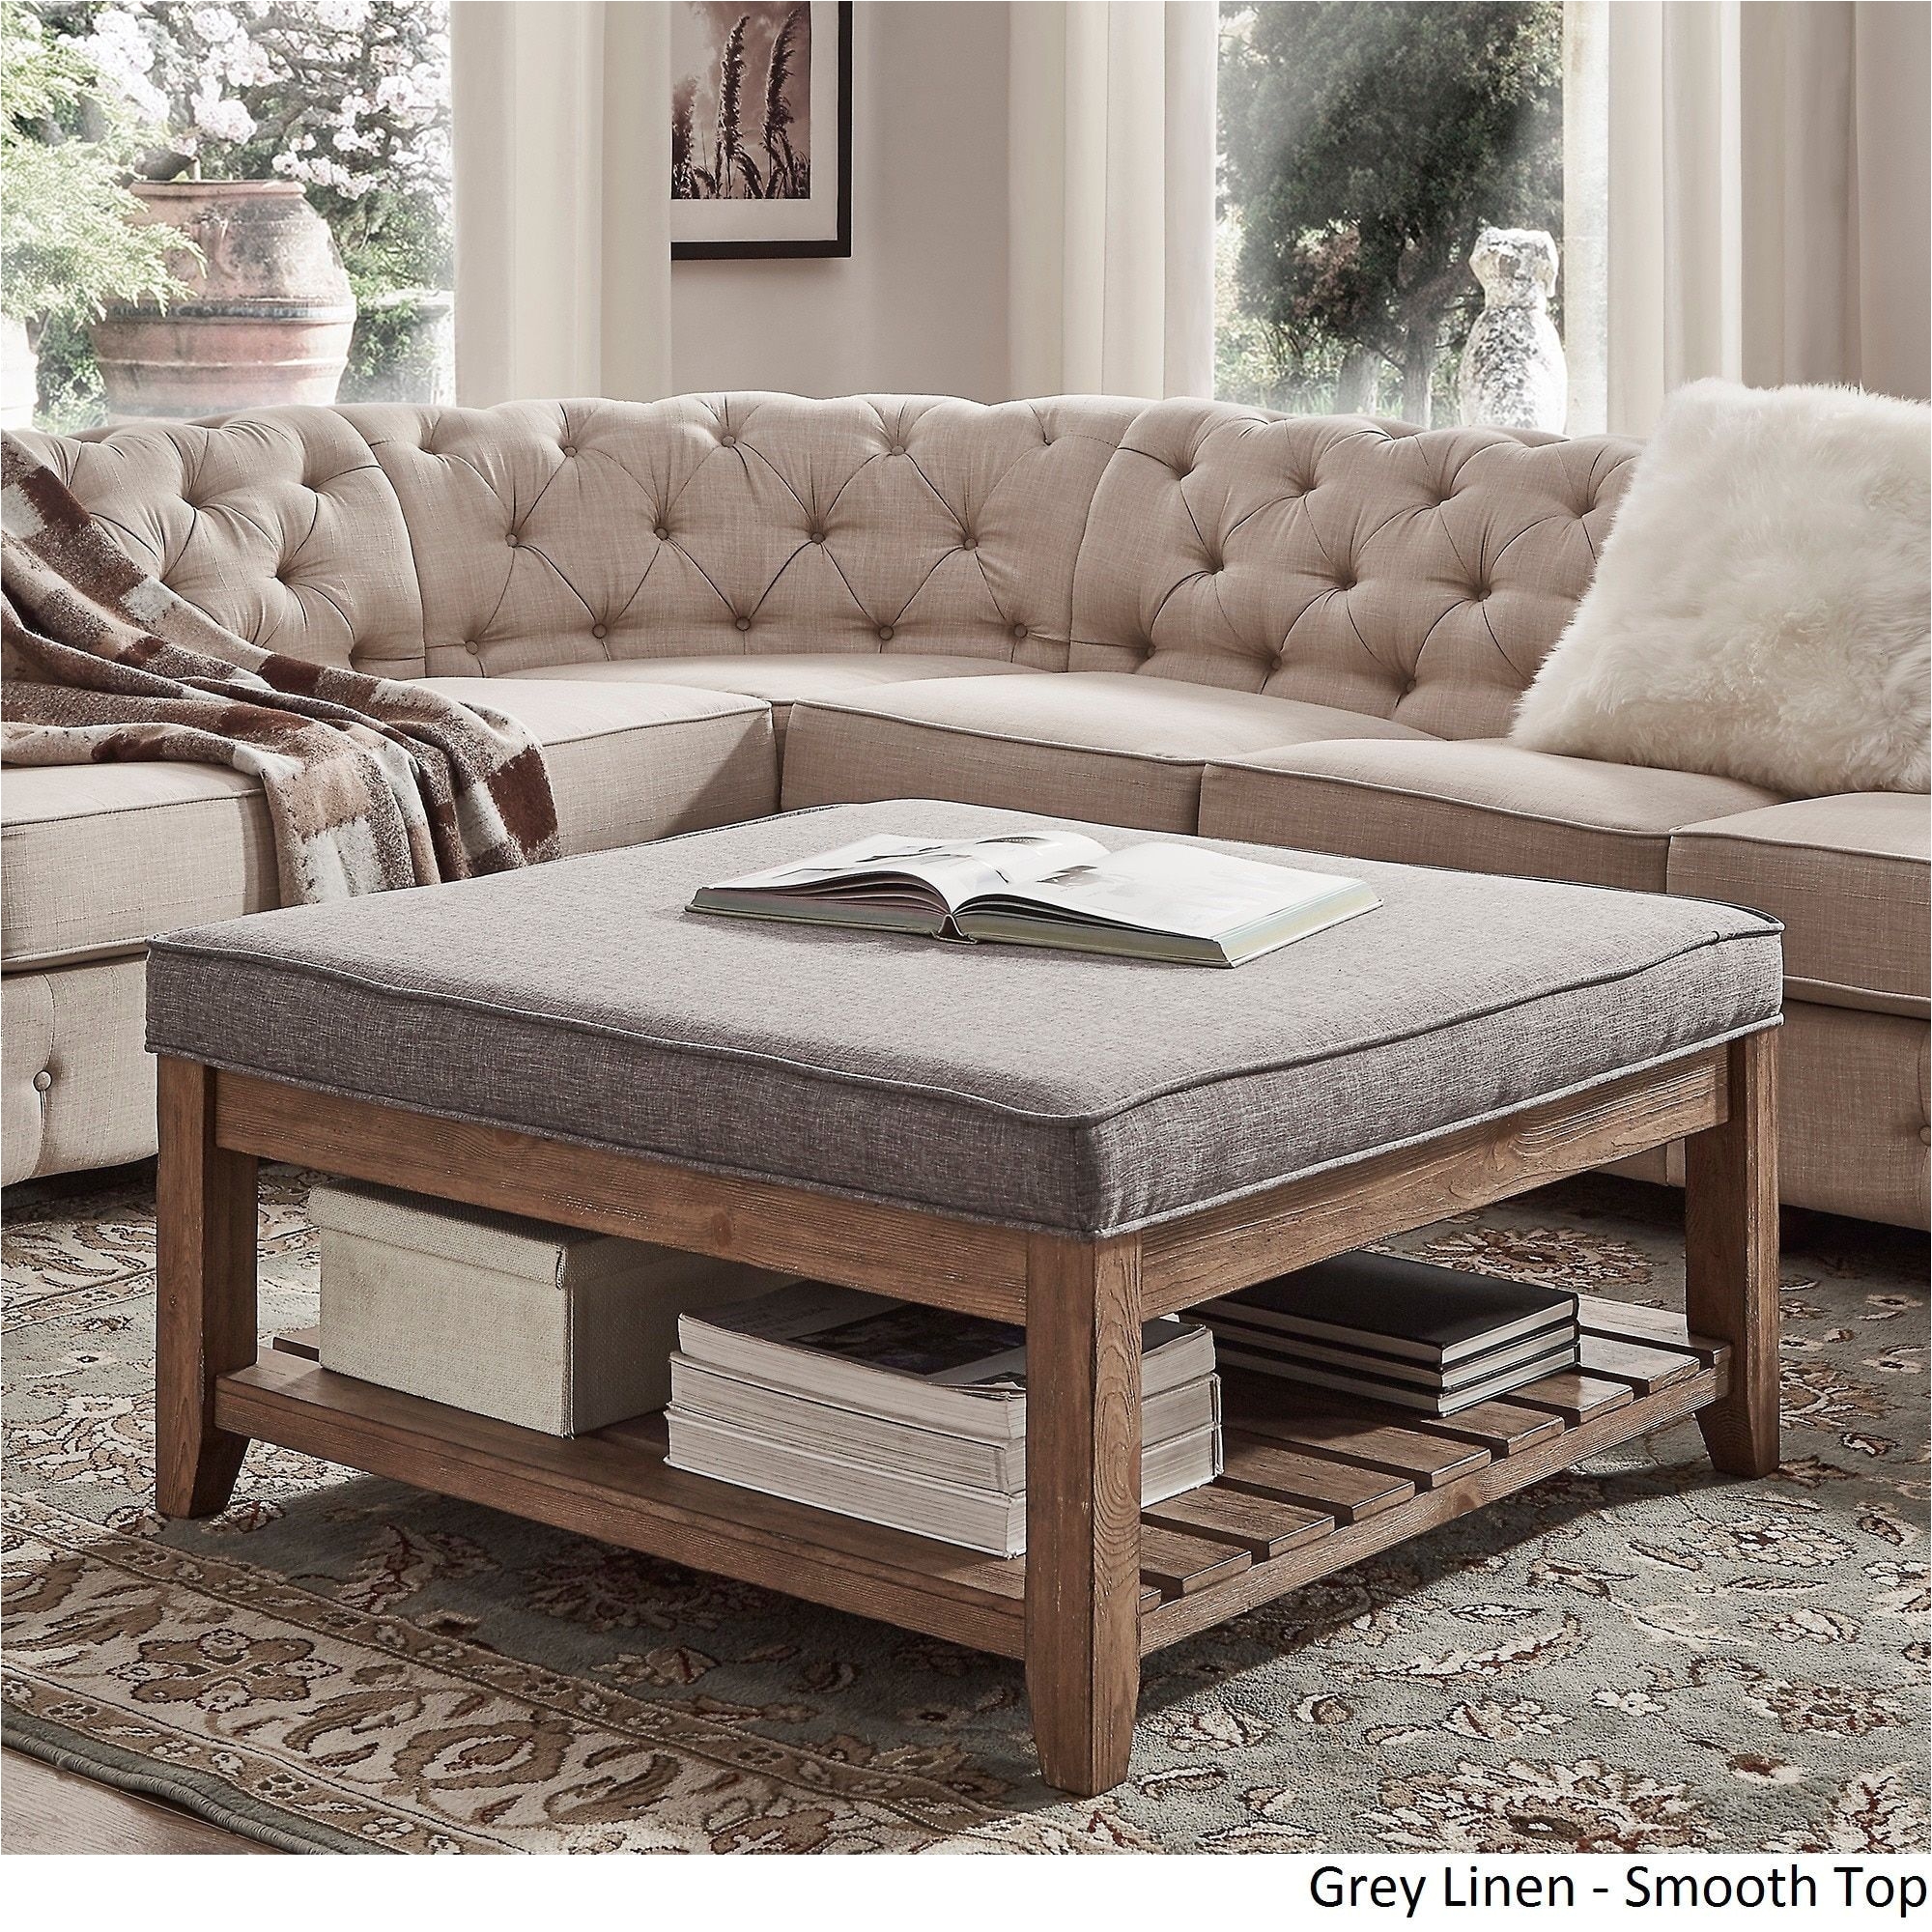 Lennon Pine Planked Storage Ottoman Coffee Table by iNSPIRE Q Artisan by iNSPIRE Q